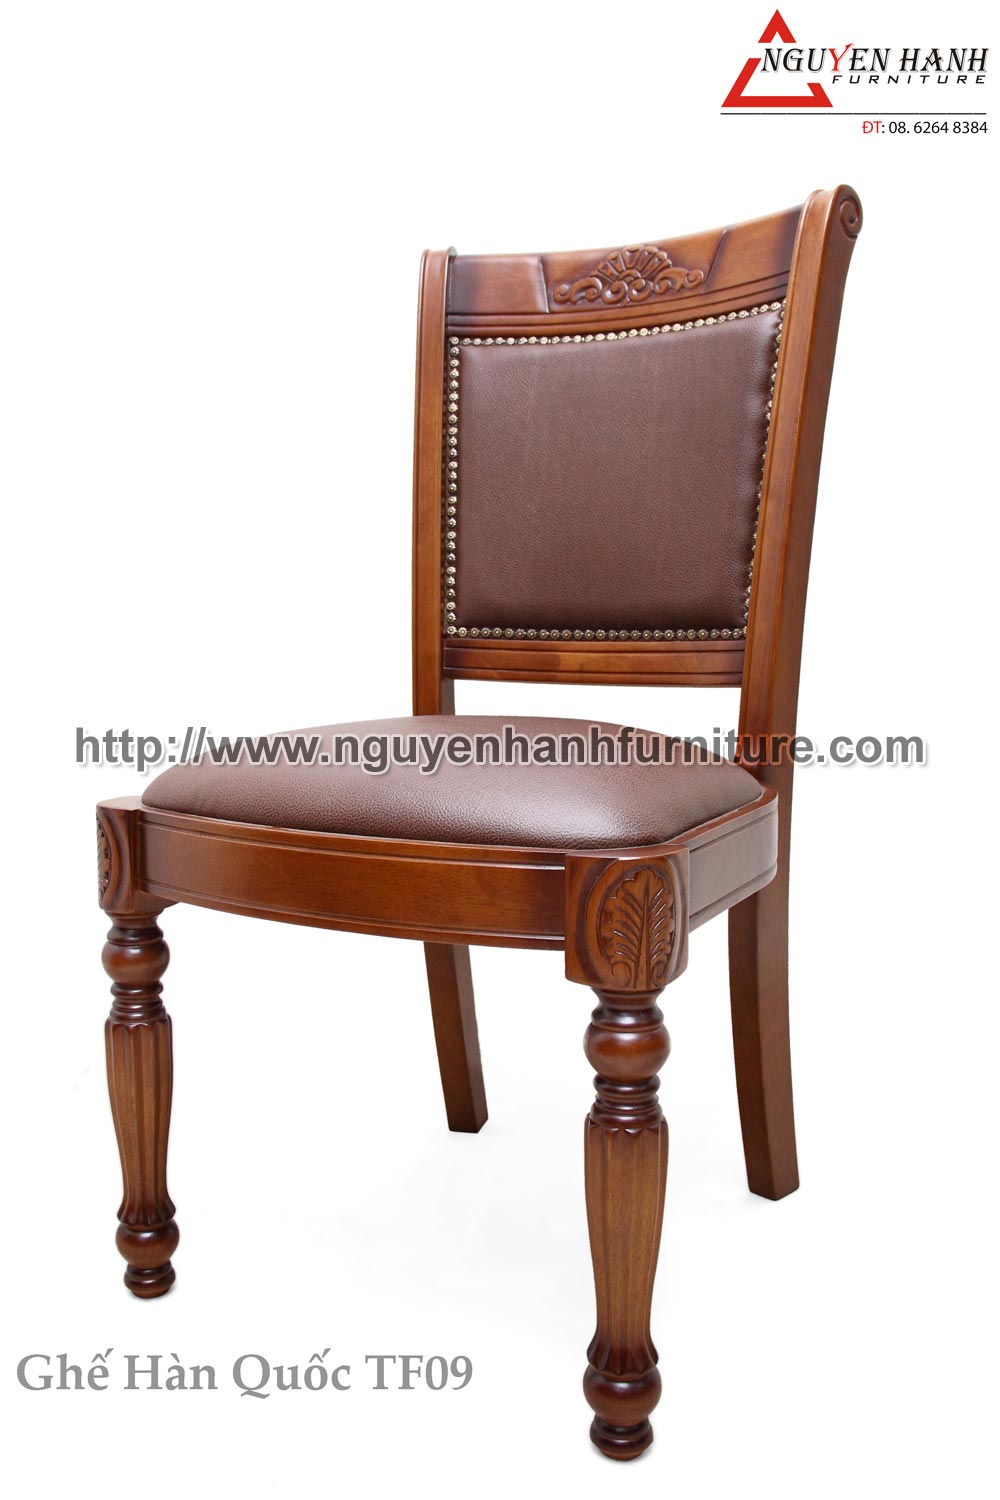 Name product: TF09 chair